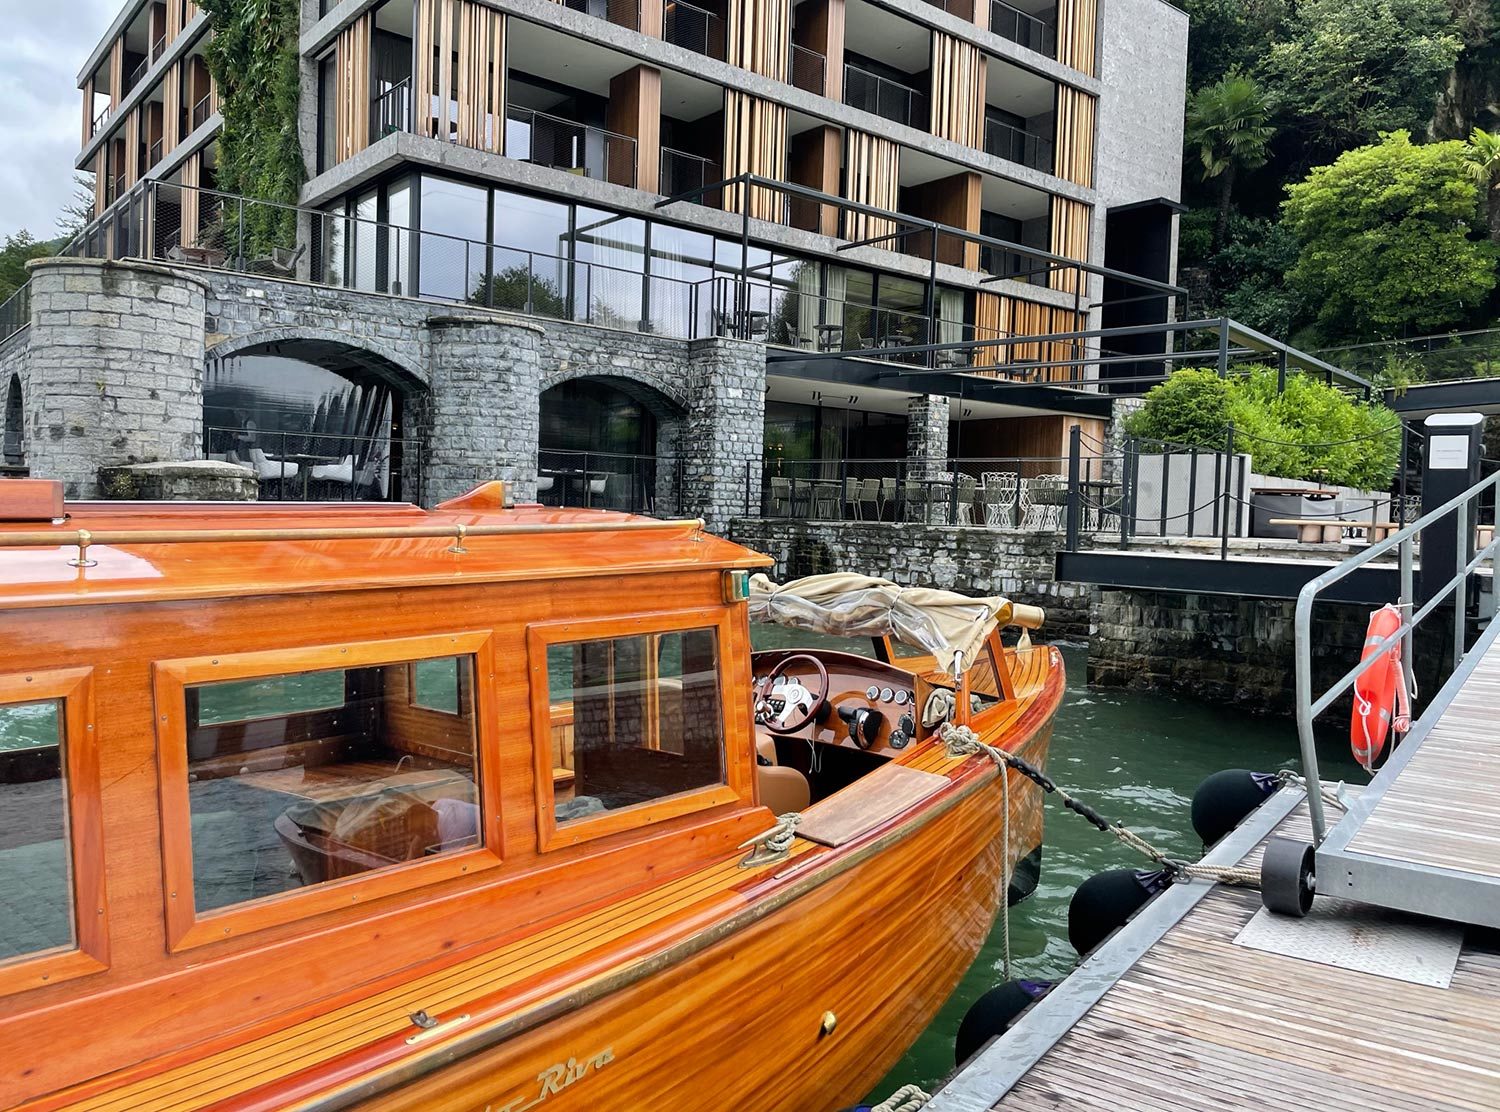 Il Sereno Roads were blocked because of a big storm the night before, so we parked in Cernobbio and were transferred to the hotel aboard this beautiful wooden boat 